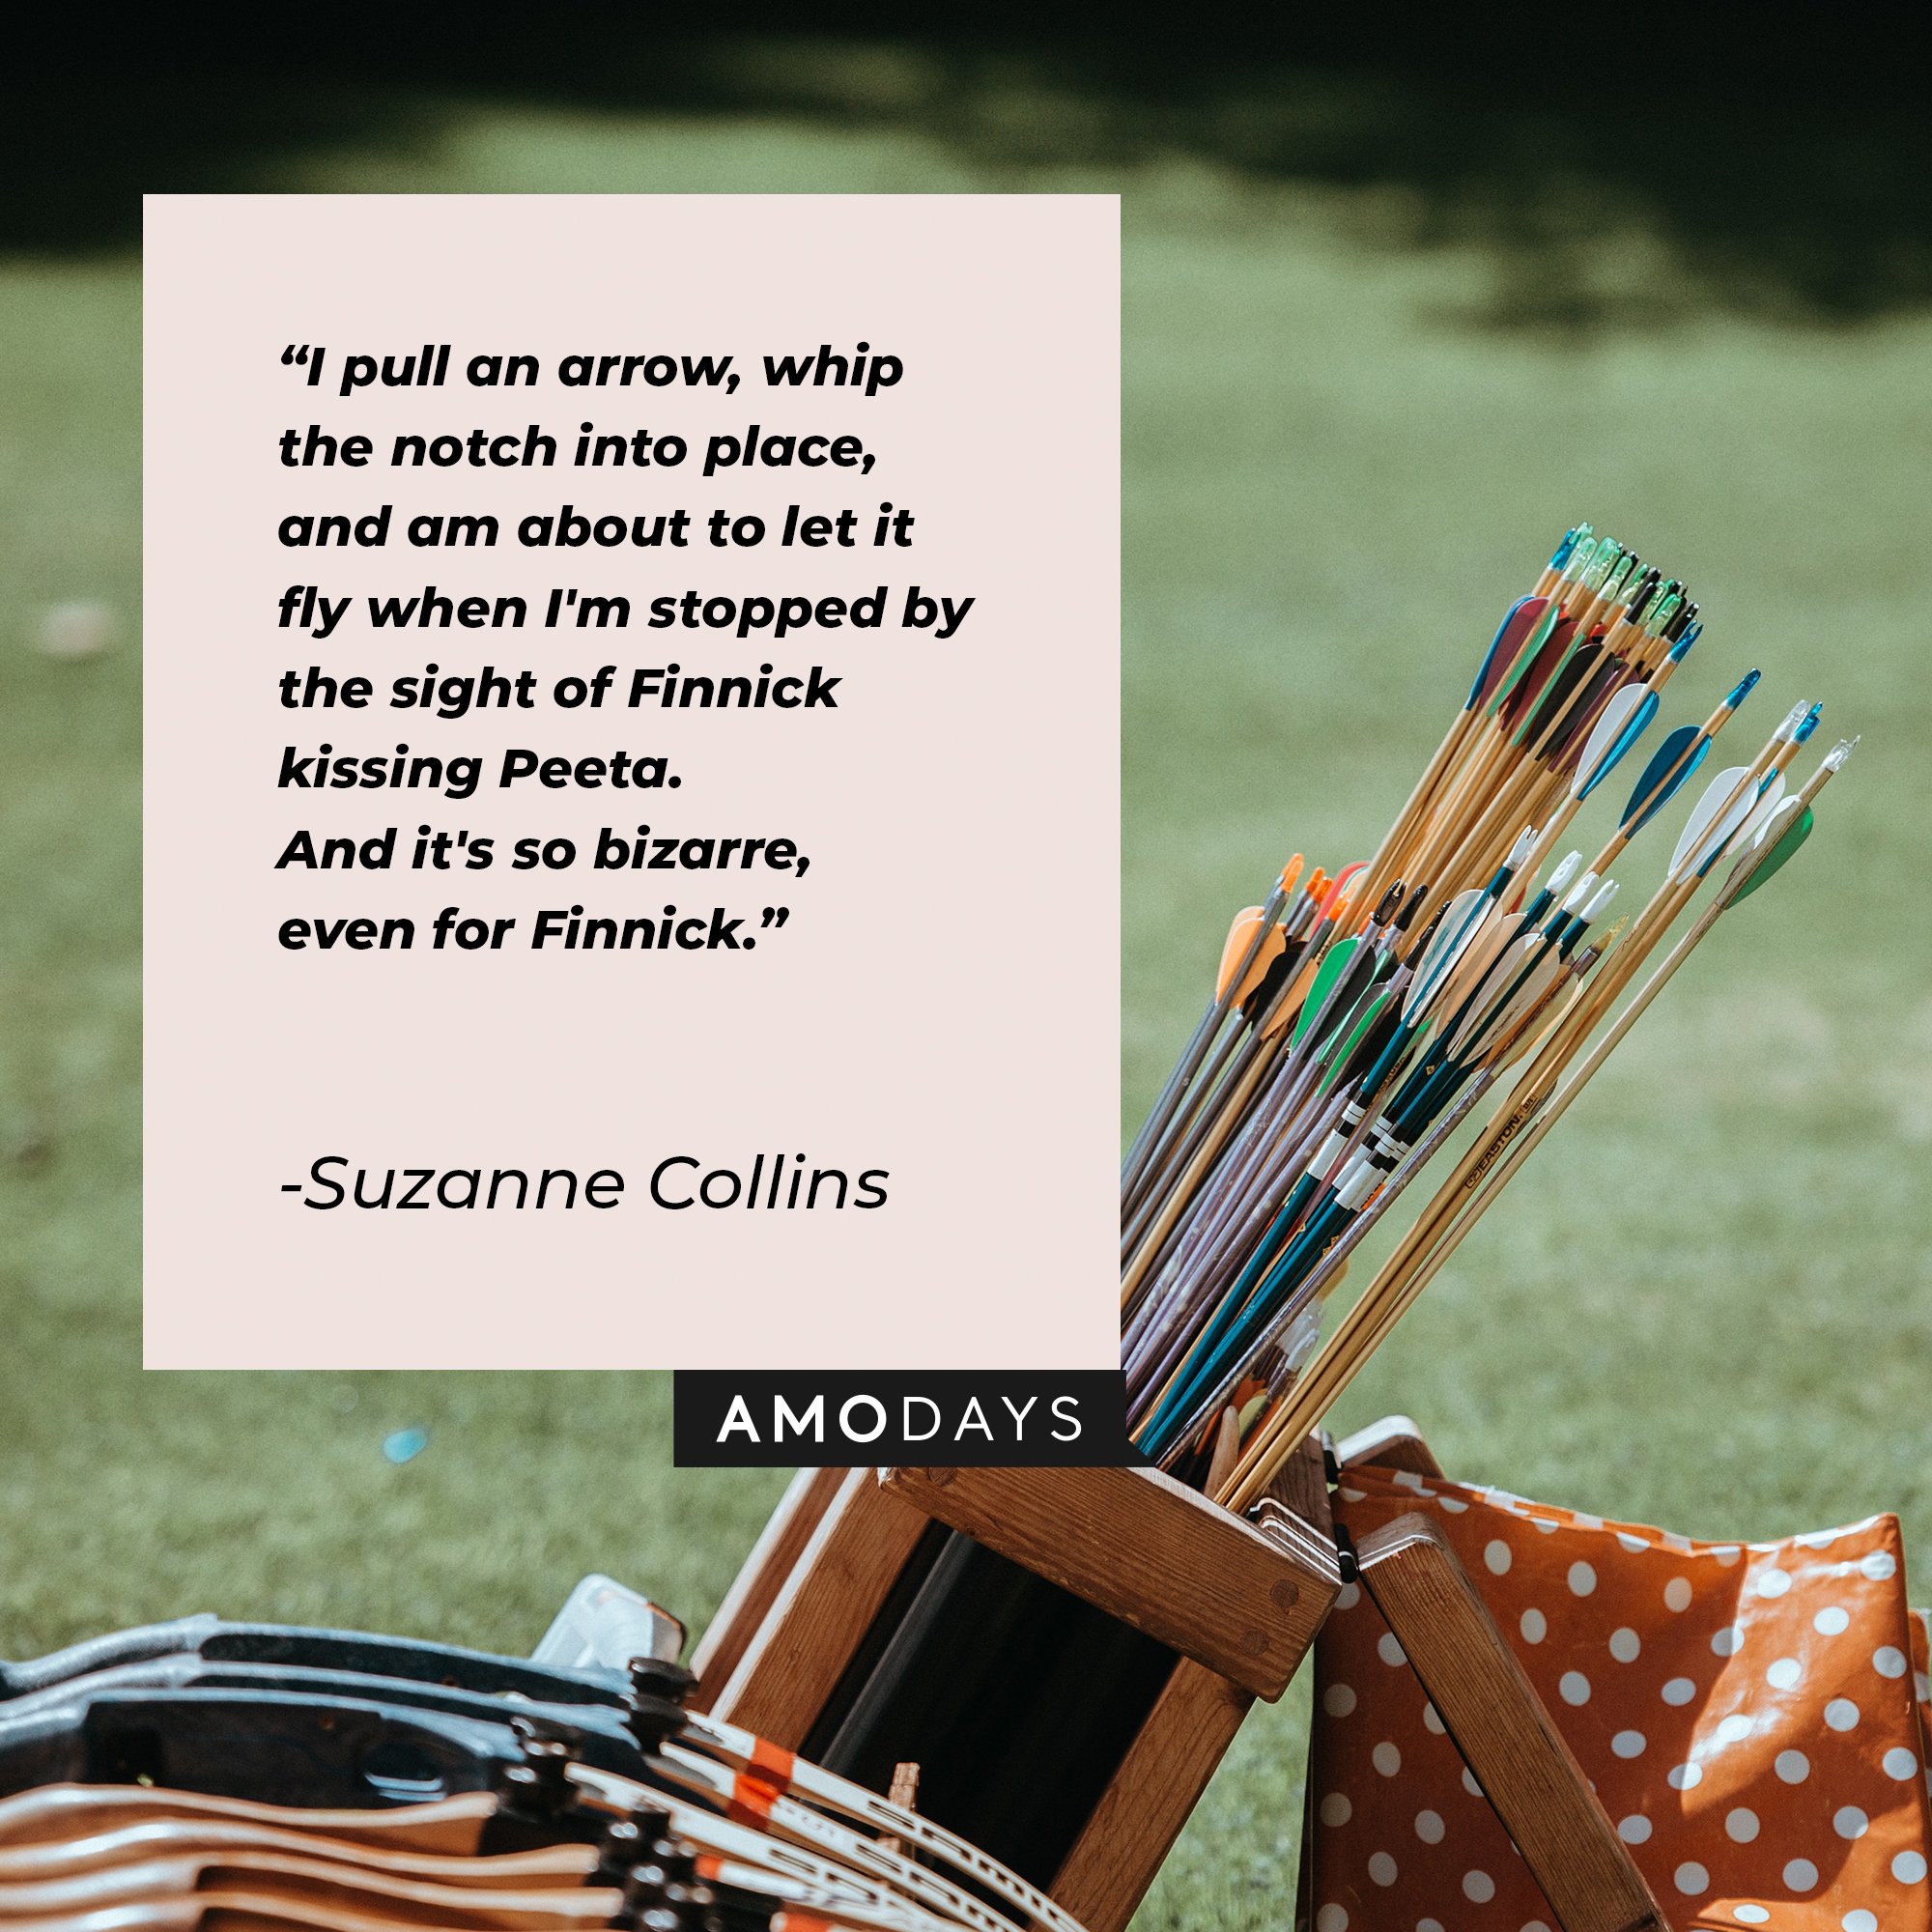 Suzanne Collins’s quote: “I pull an arrow, whip the notch into place, and am about to let it fly when I'm stopped by the sight of Finnick kissing Peeta. And it's so bizarre, even for Finnick." | Image: AmoDays